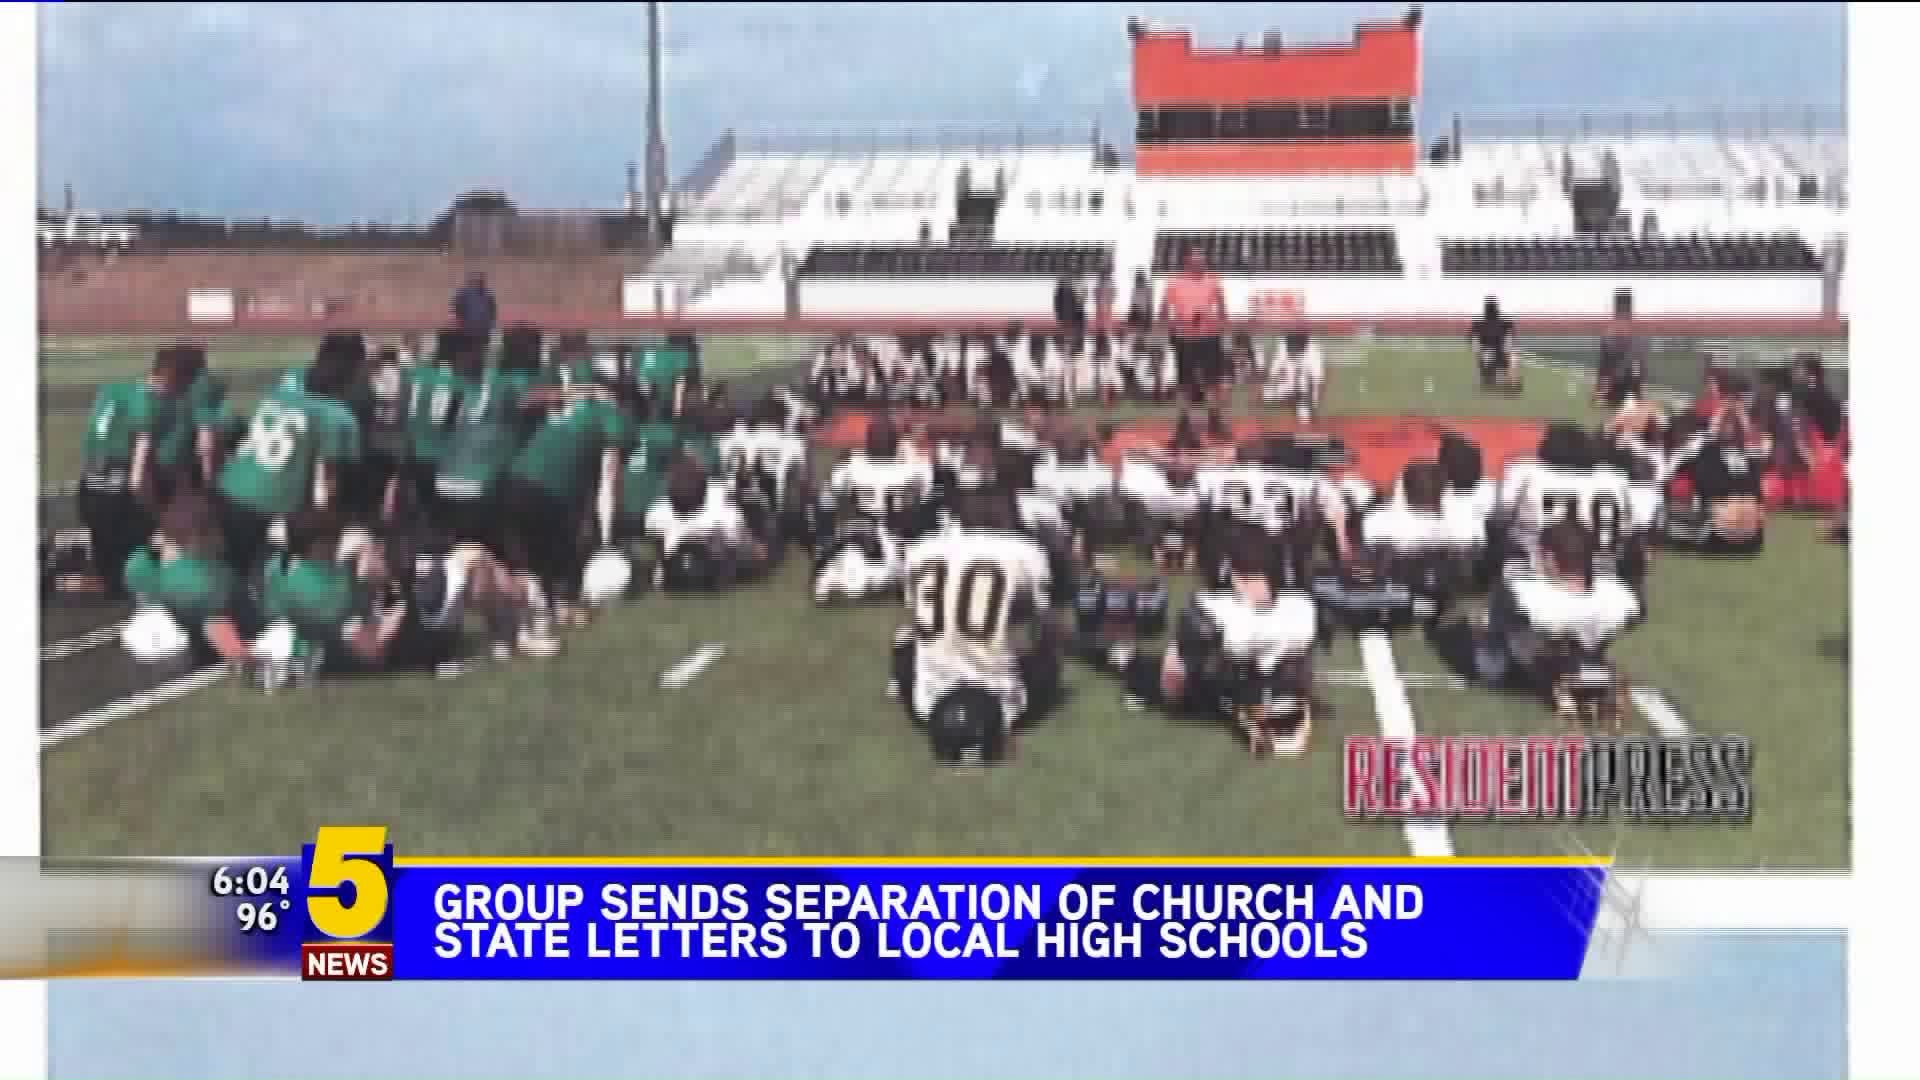 Seperation of church request sent to local schools.